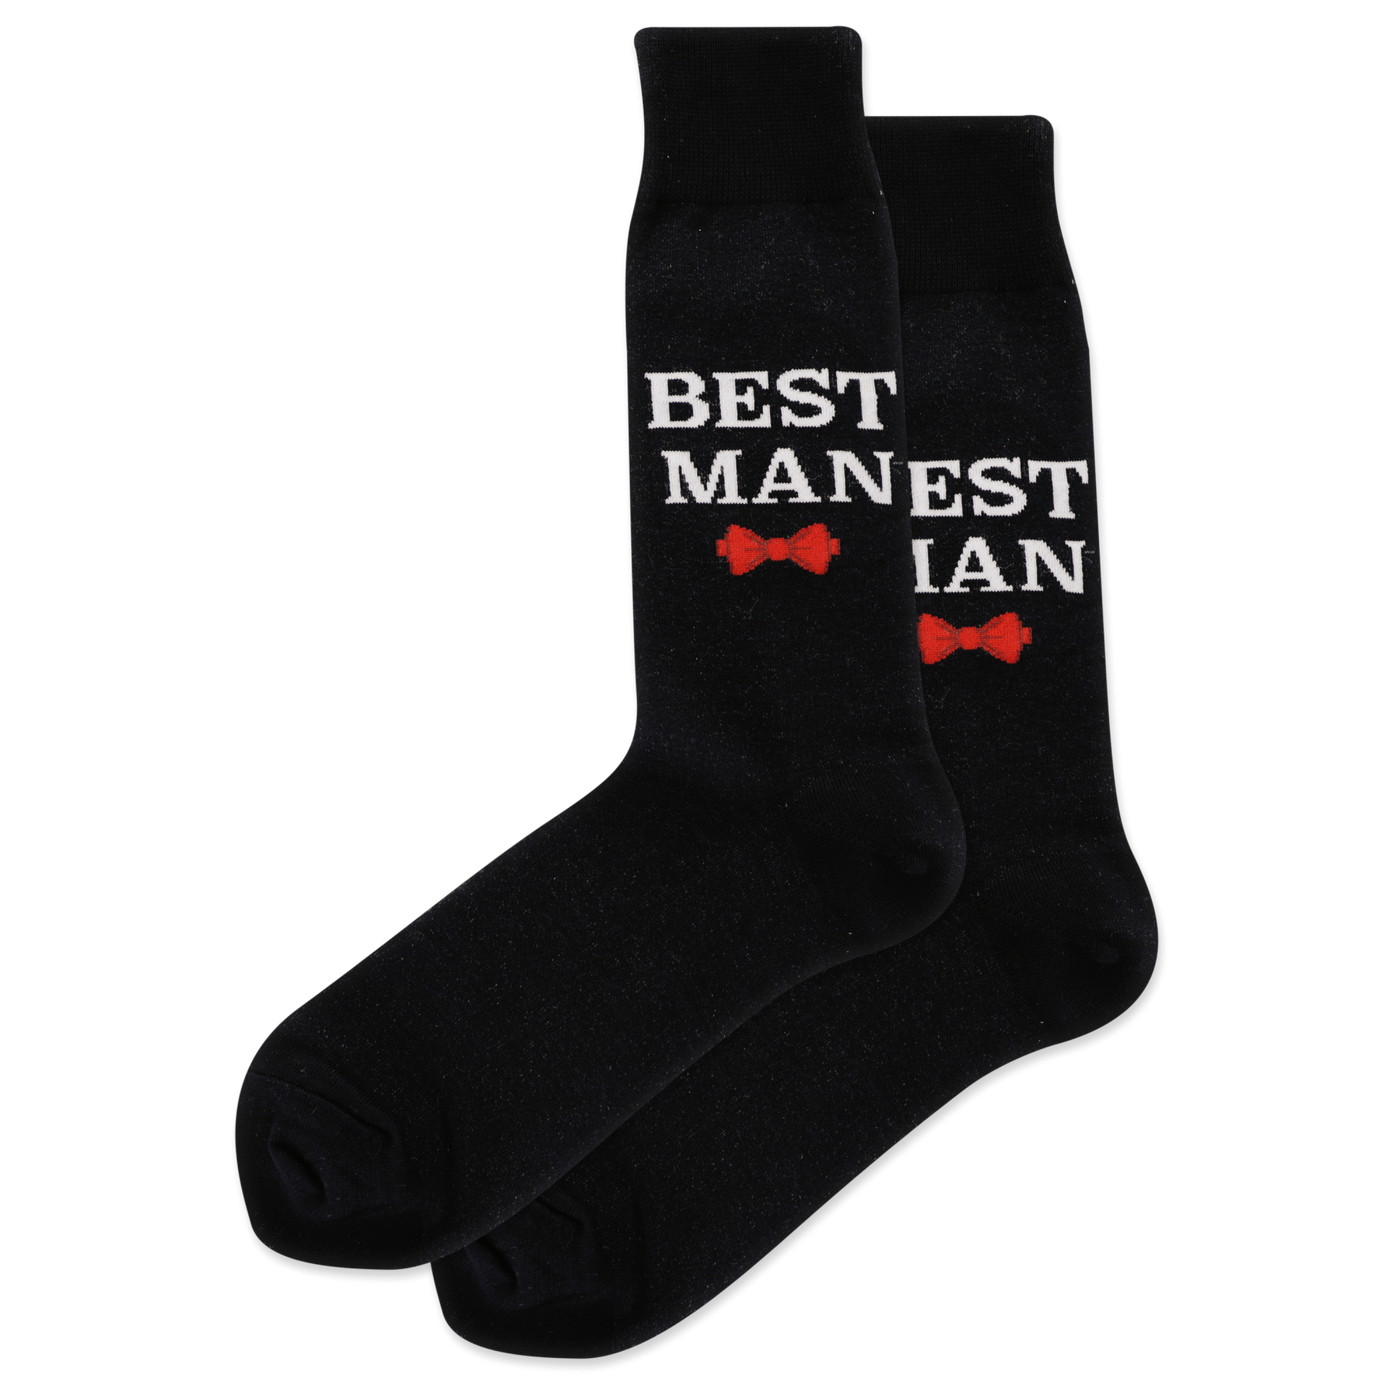 "Best Man" Cotton Crew Socks by Hot Sox - Large